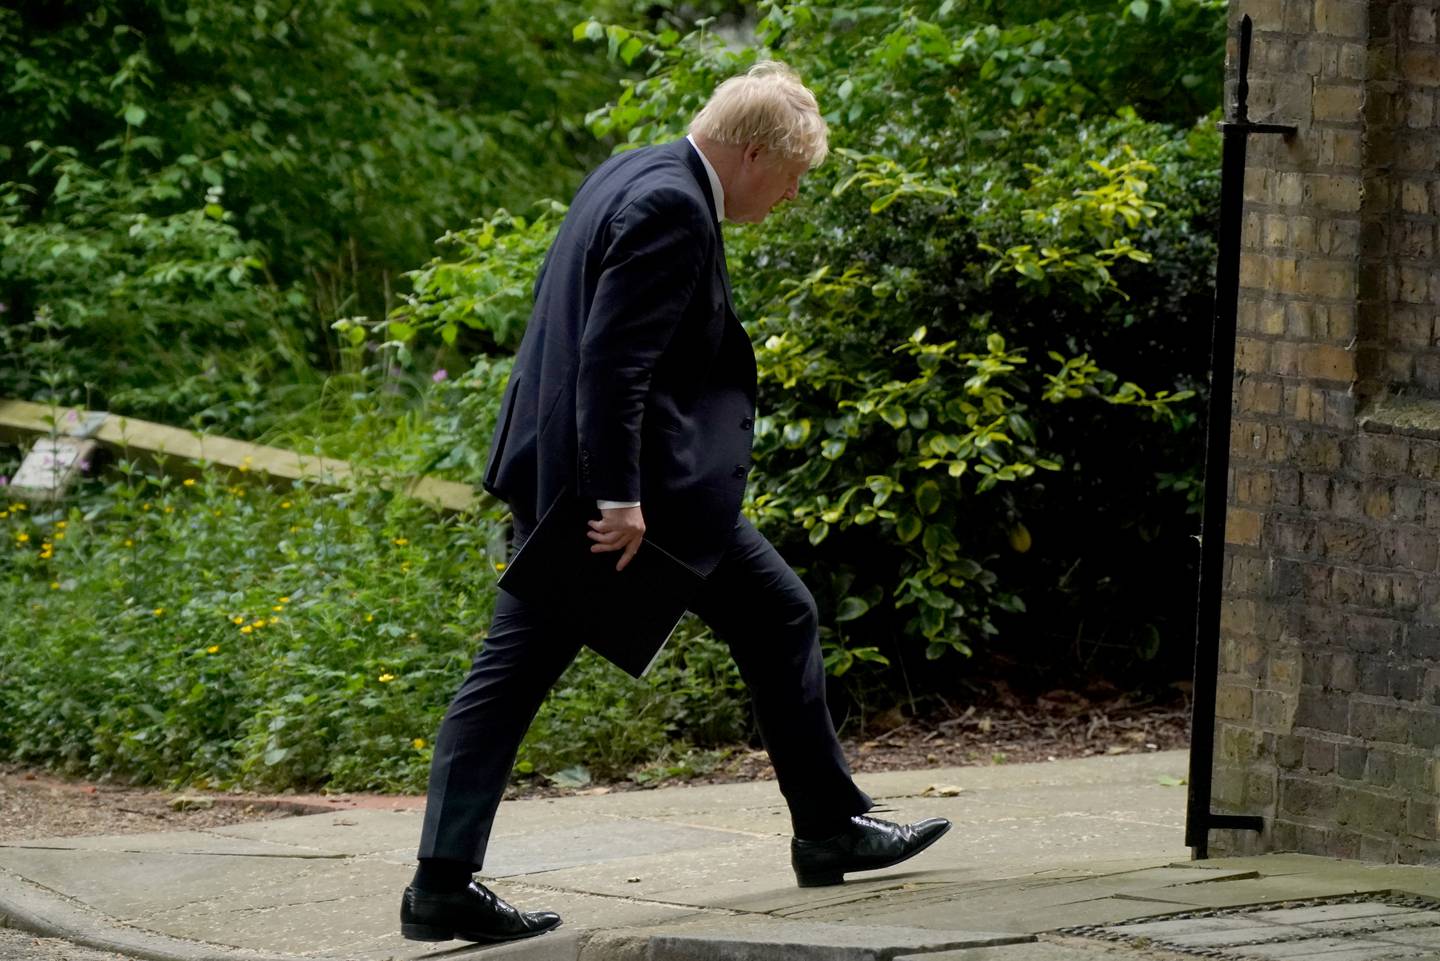 Boris Johnson heads to a press conference in Downing Street, following the publication of Sue Gray's report. PA